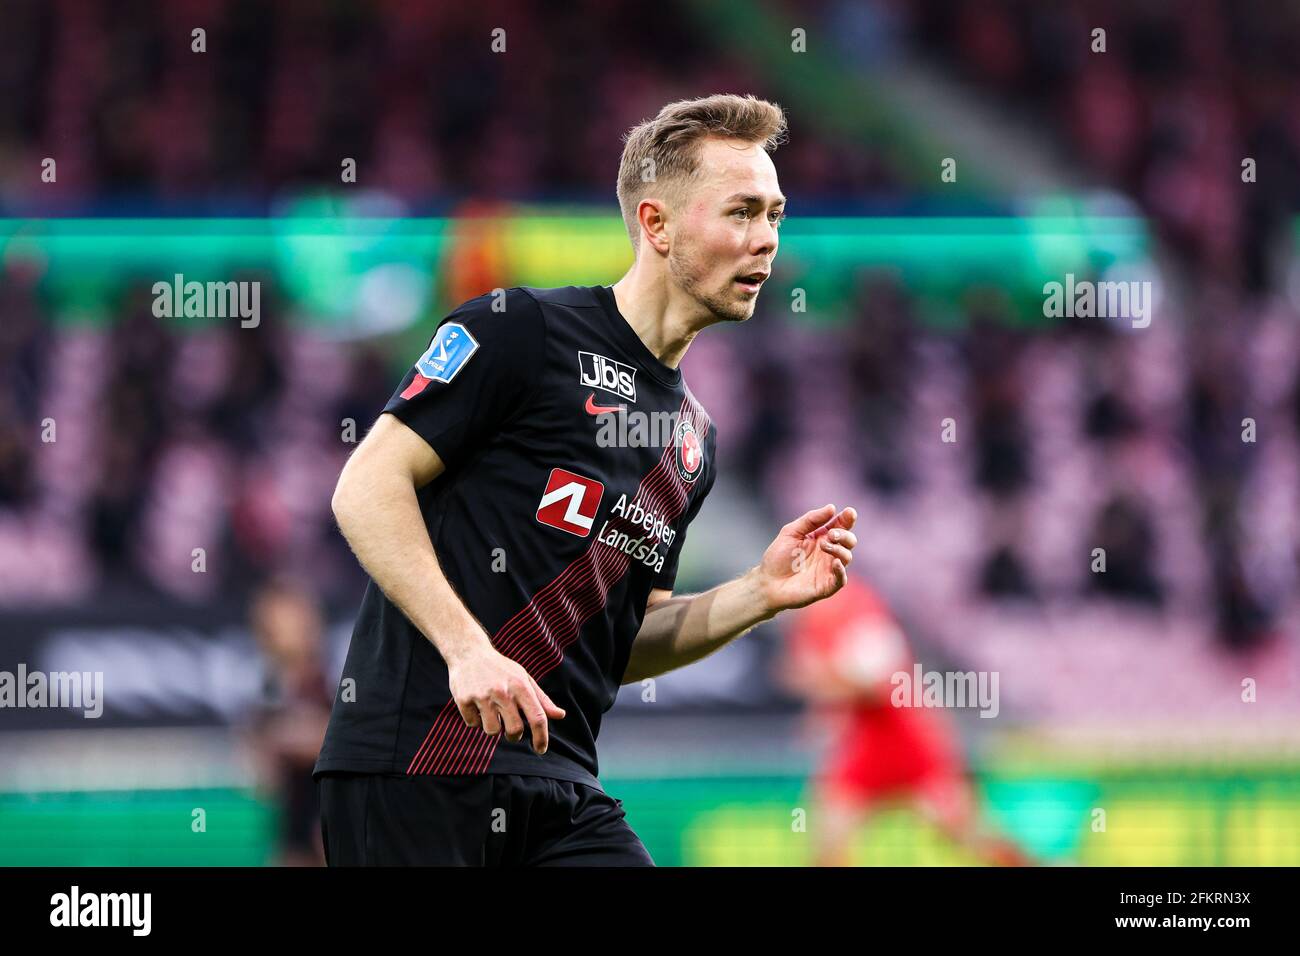 Herning, Denmark. 2nd, May 2021. Joel Andersson (6) of FC Midtjylland seen  during the 3F Superliga match between FC Midtjylland and FC Nordsjaelland  at MCH Arena in Herning, Denmark. (Photo credit: Gonzales